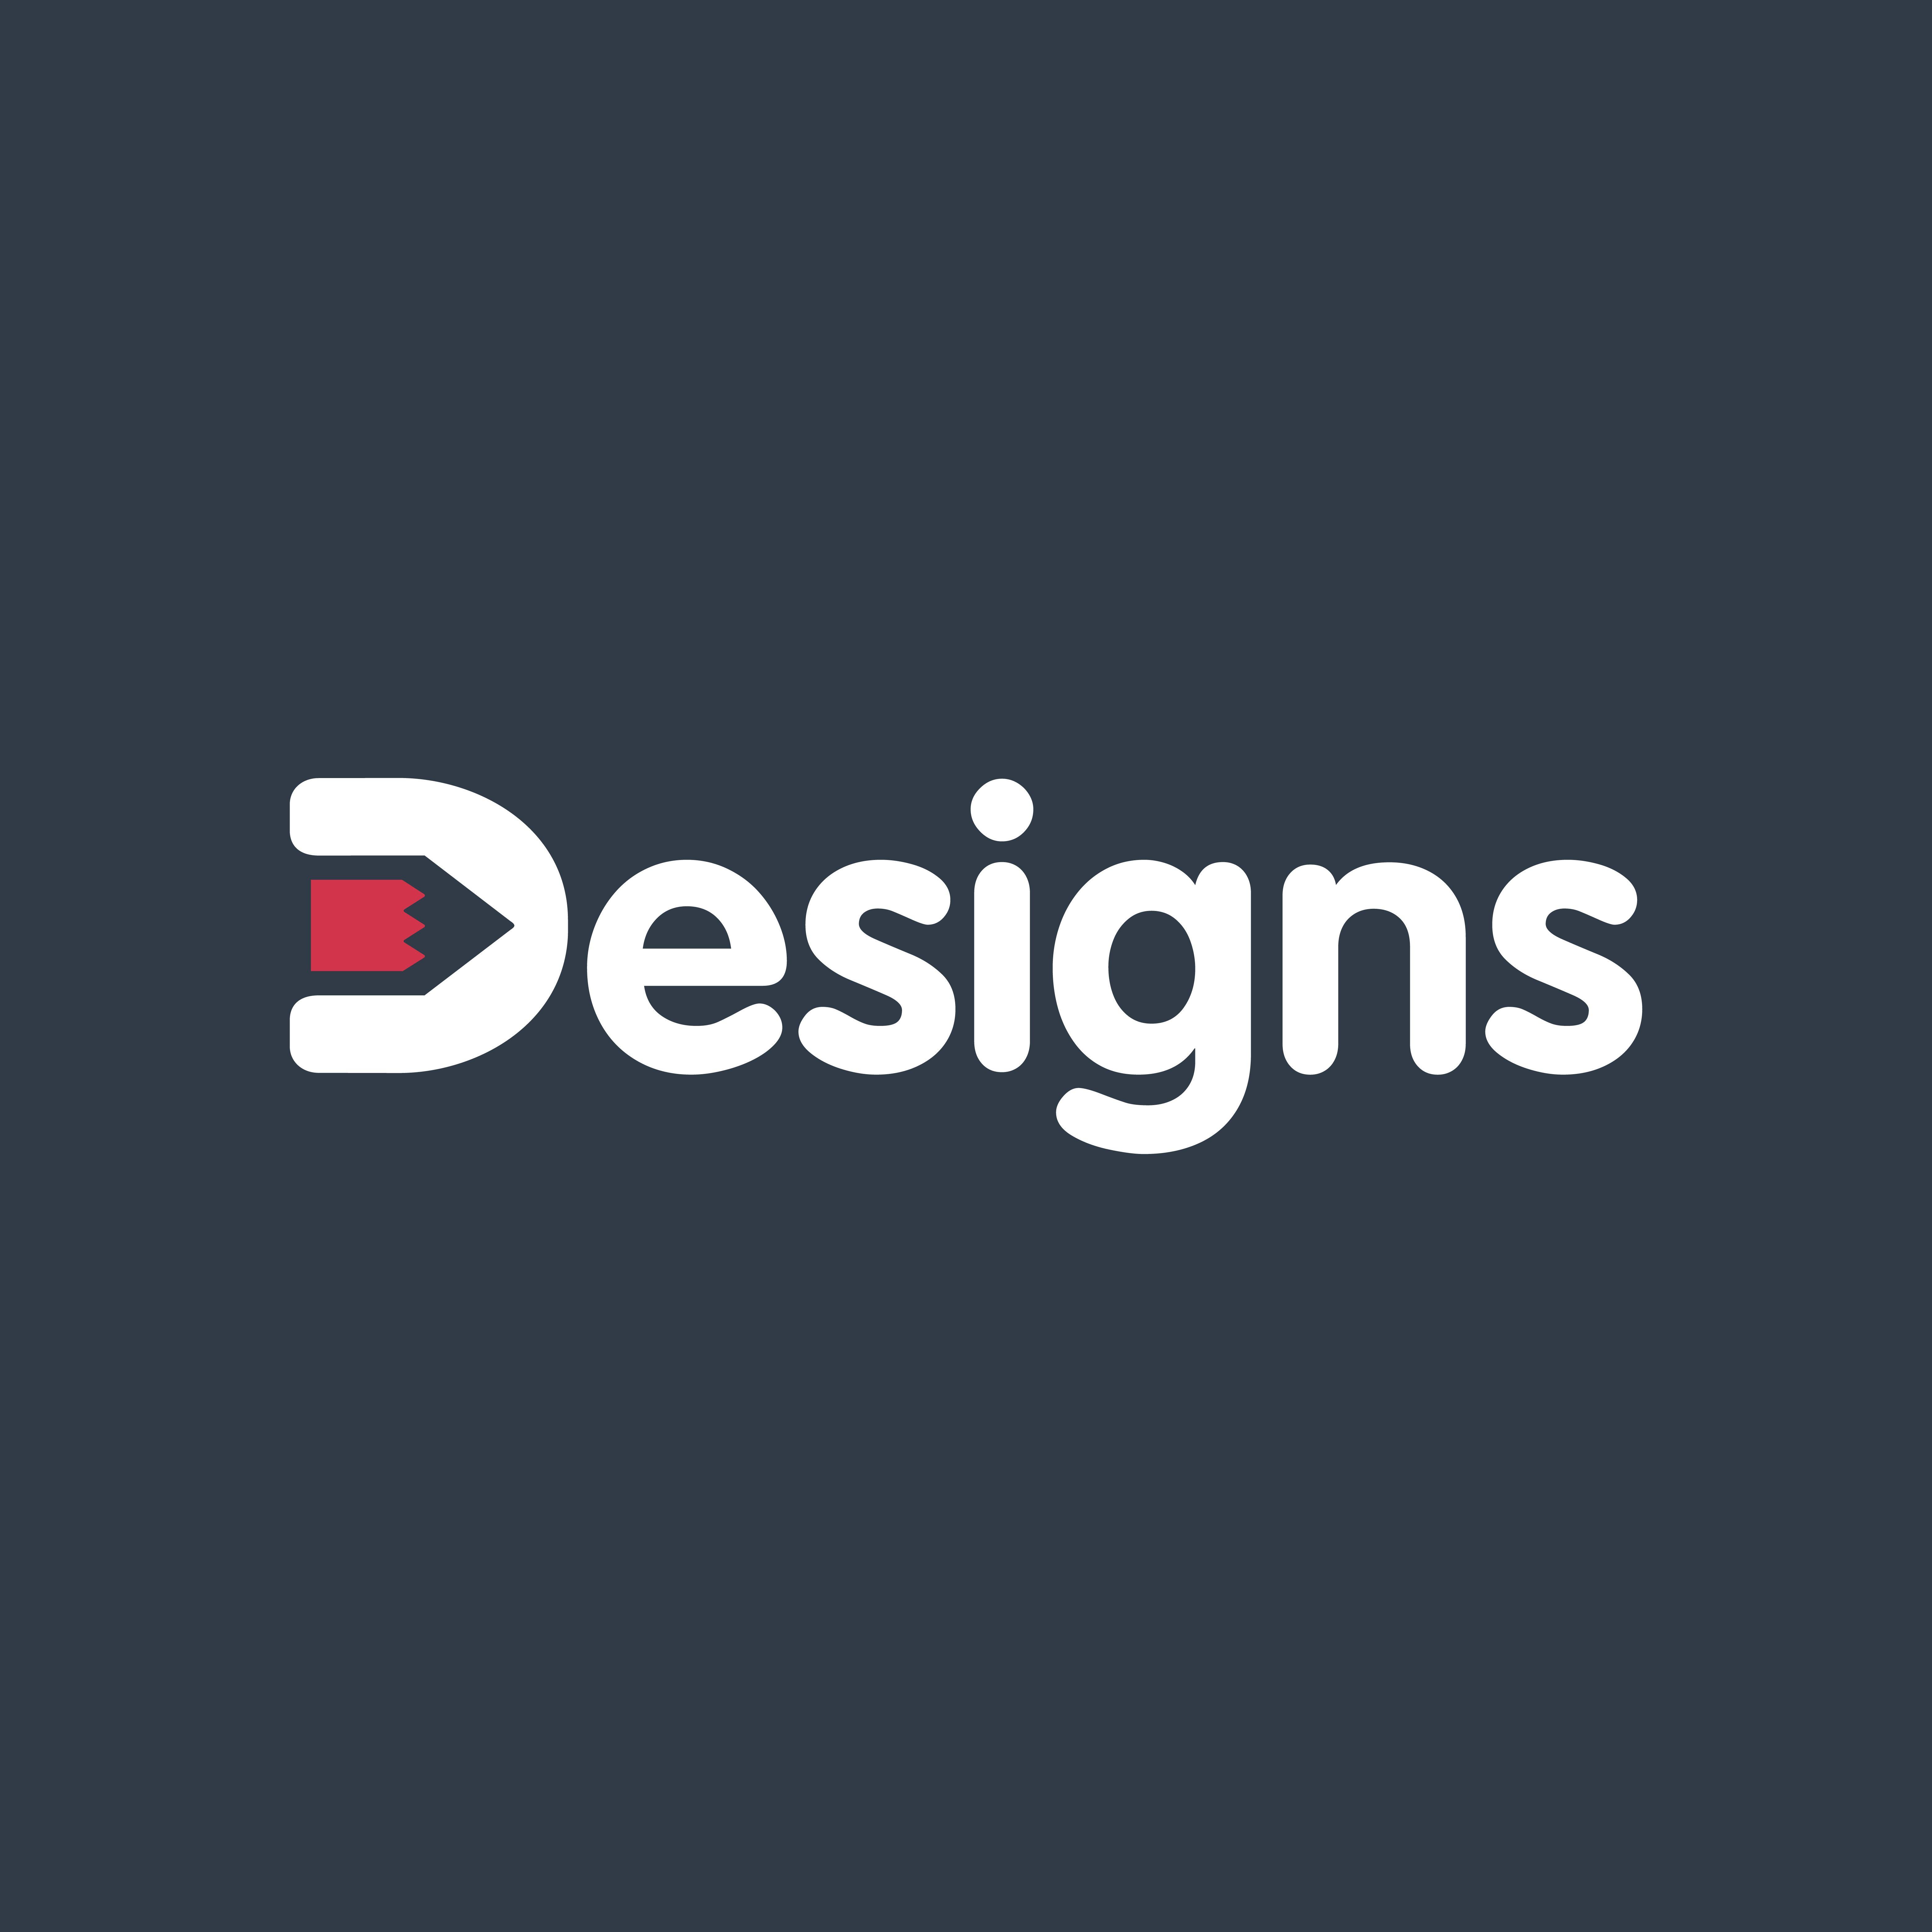 Designs Logo - Templates, Themes, Logos, Fonts And More | Designs.net